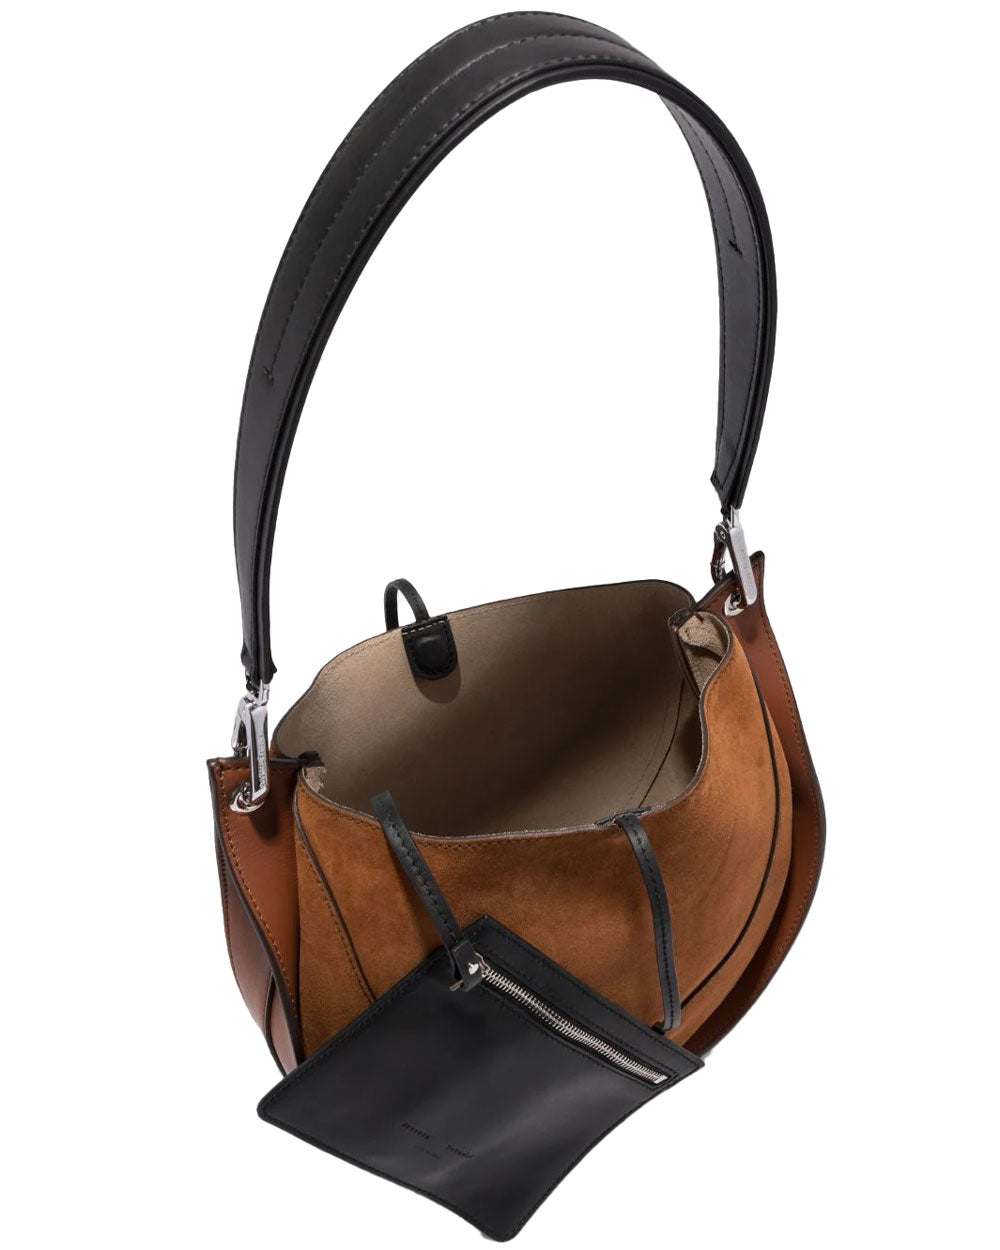 Arch Shoulder Bag in Chocolate